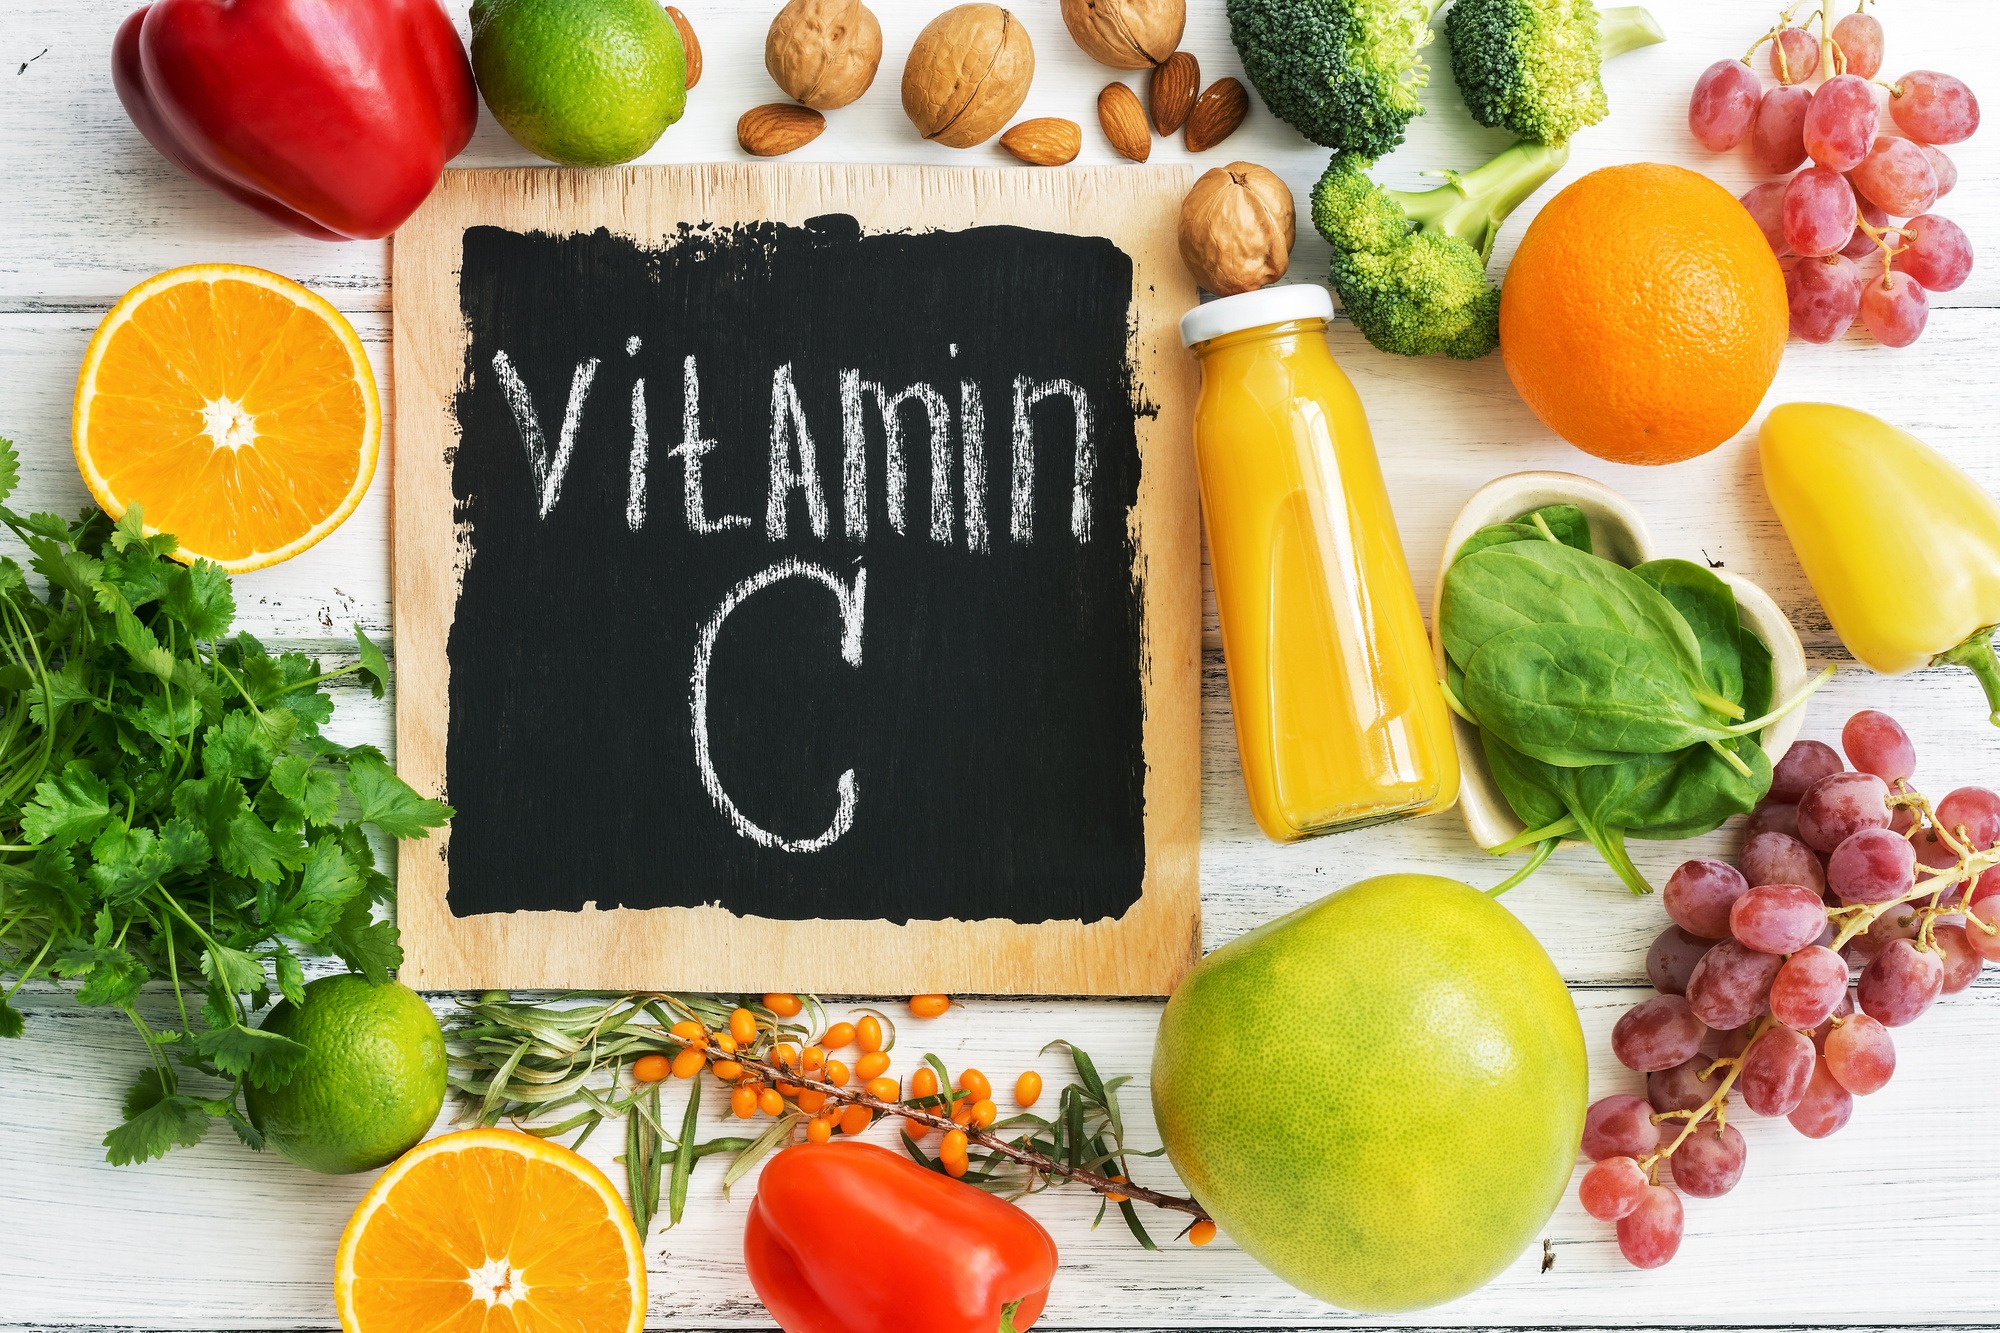 Vitamin C can shorten your ICU stay